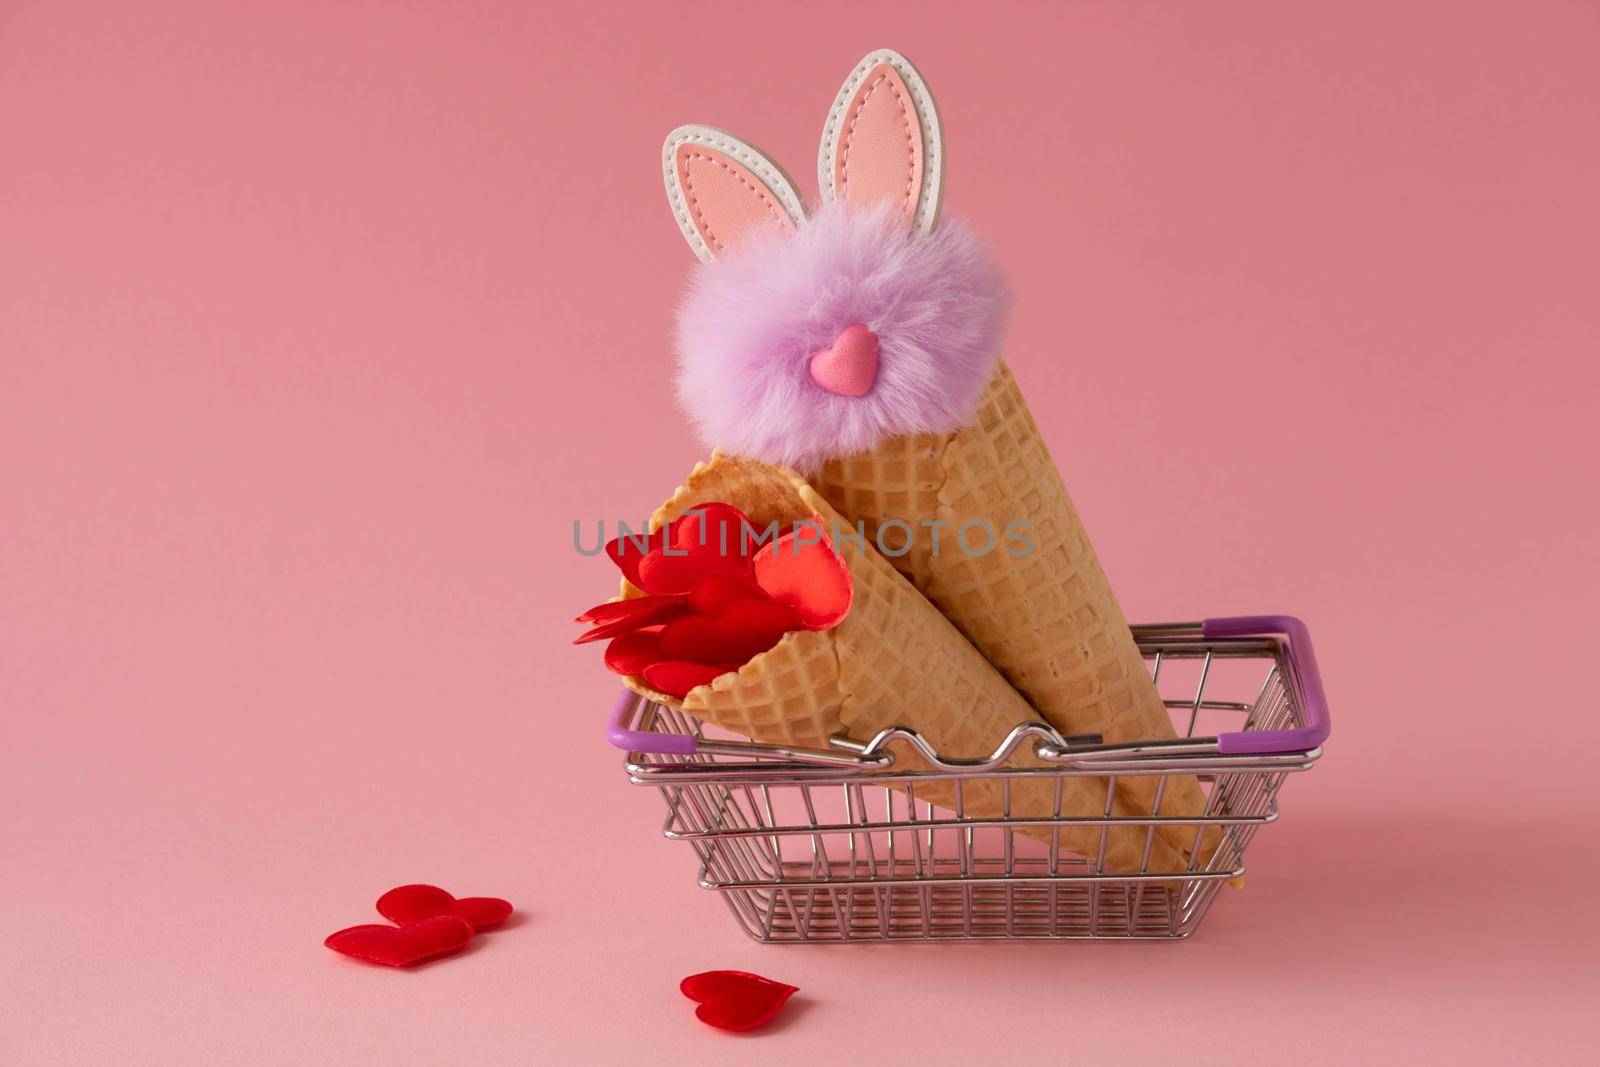 Abstract pink background with red hearts and a fluffy lilac rabbit in a grocery basket and waffle cones. The concept of love, a greeting card for Valentine's Day and Easter. by lapushka62